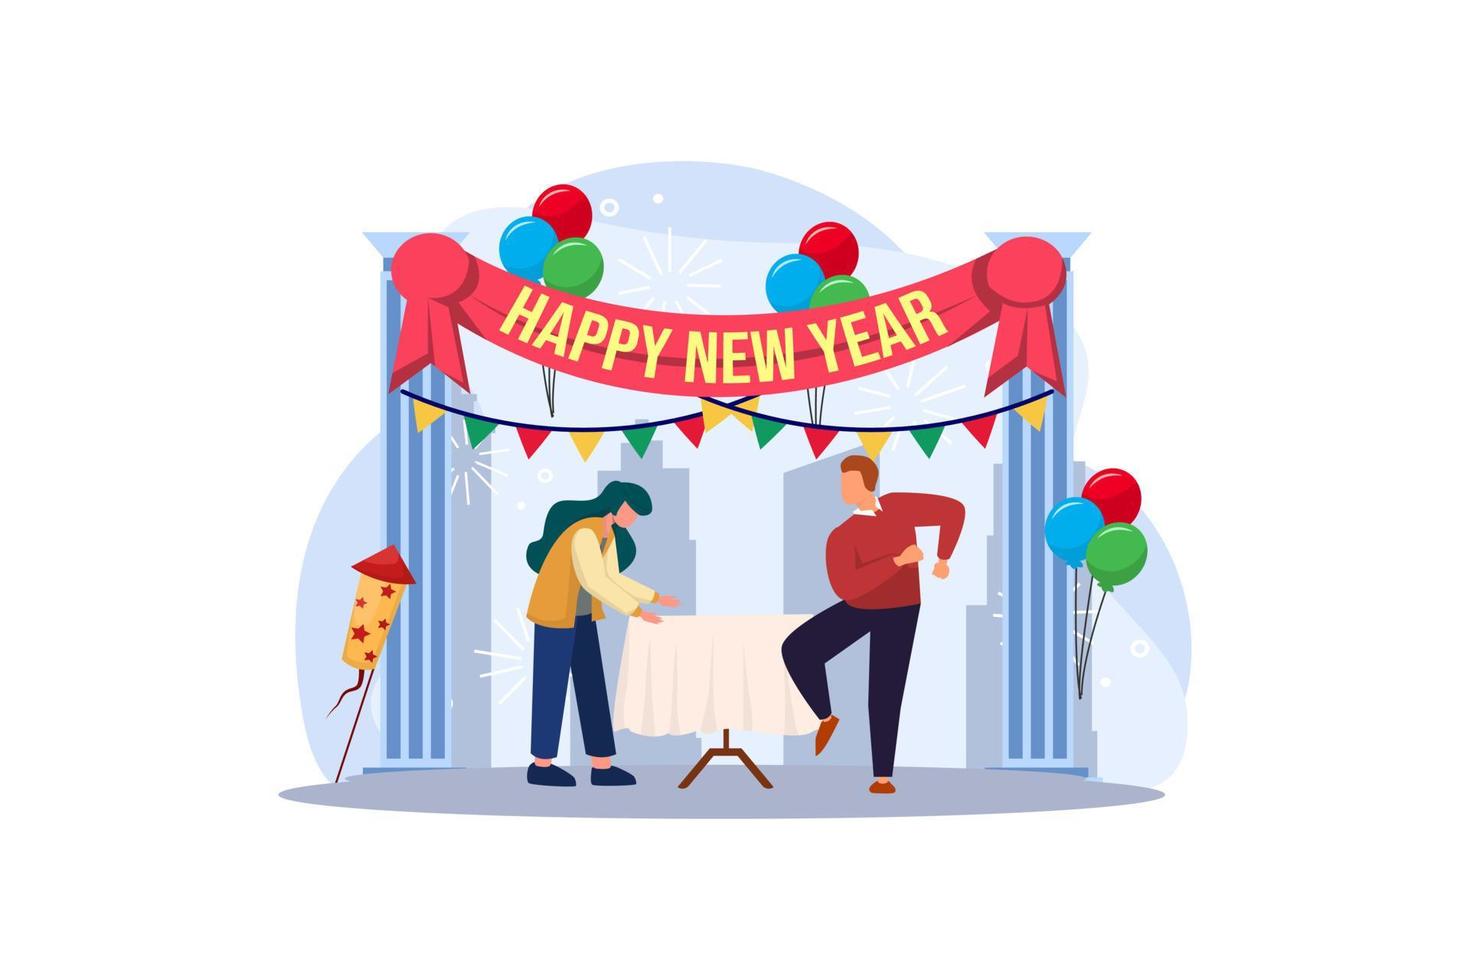 Party New Year with Friends Flat Design vector